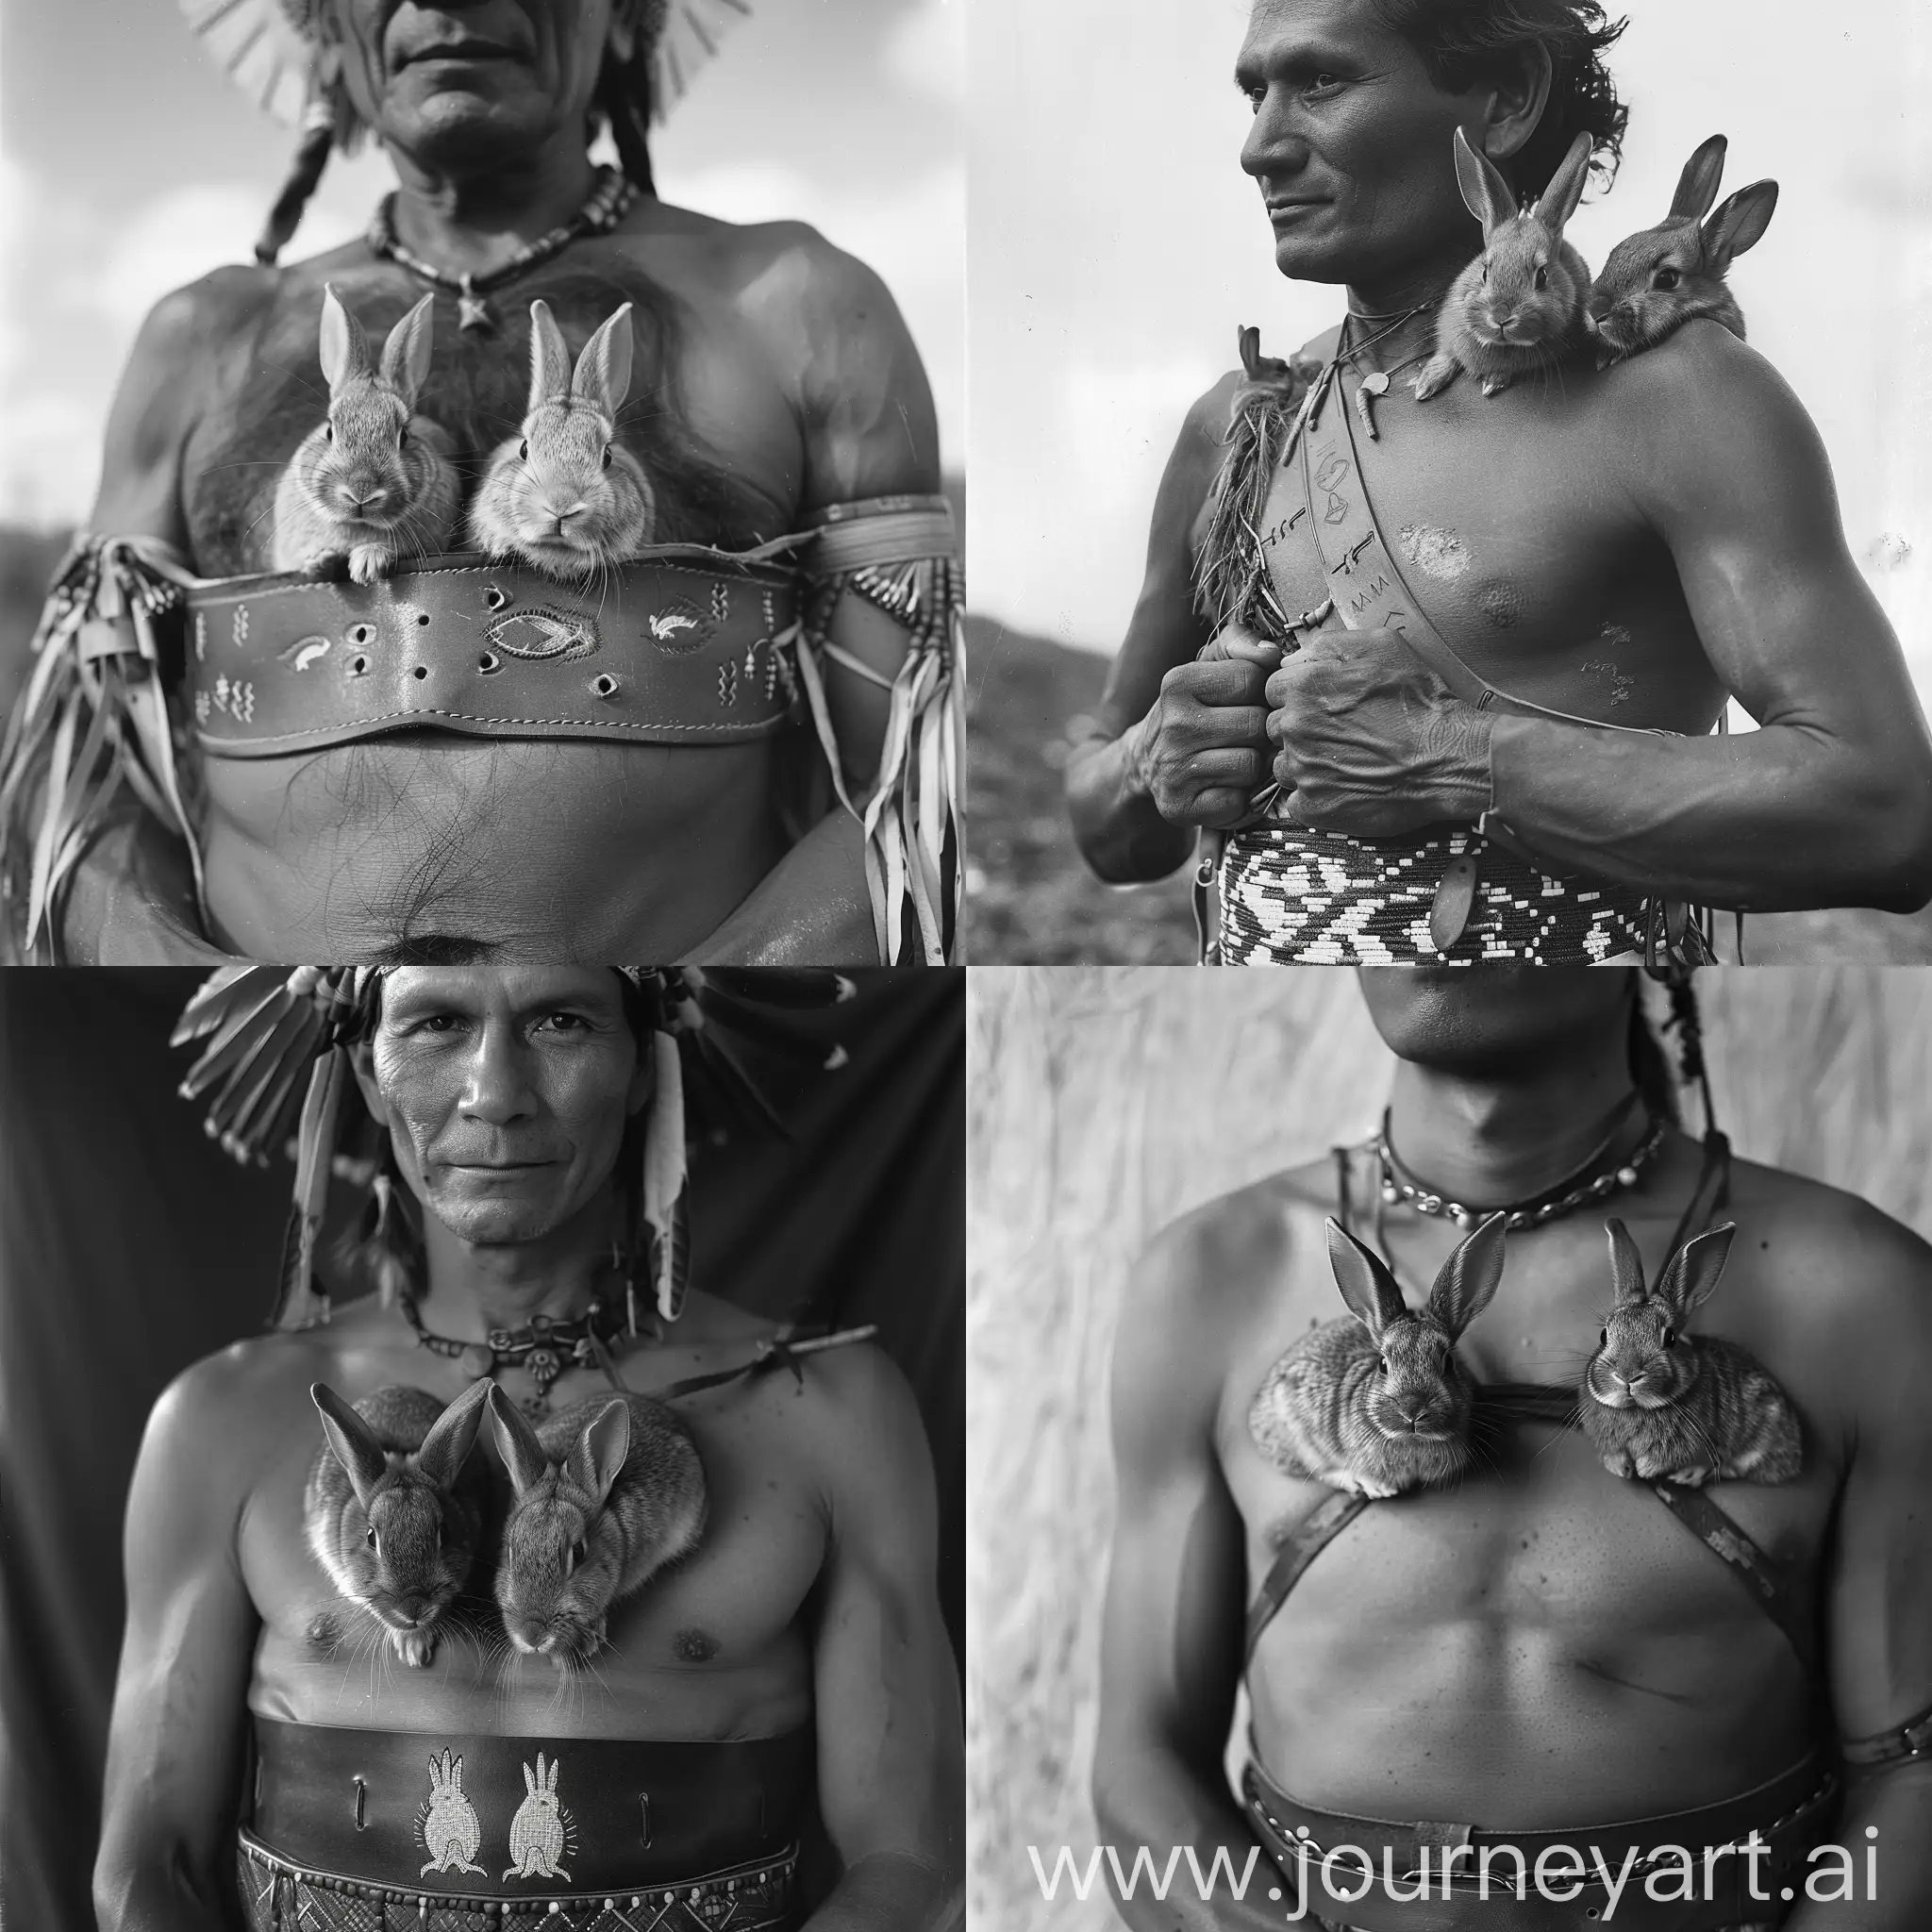 Indian-Man-with-Two-Rabbits-on-Chest-Cultural-Tradition-Captured-in-Unique-Attire